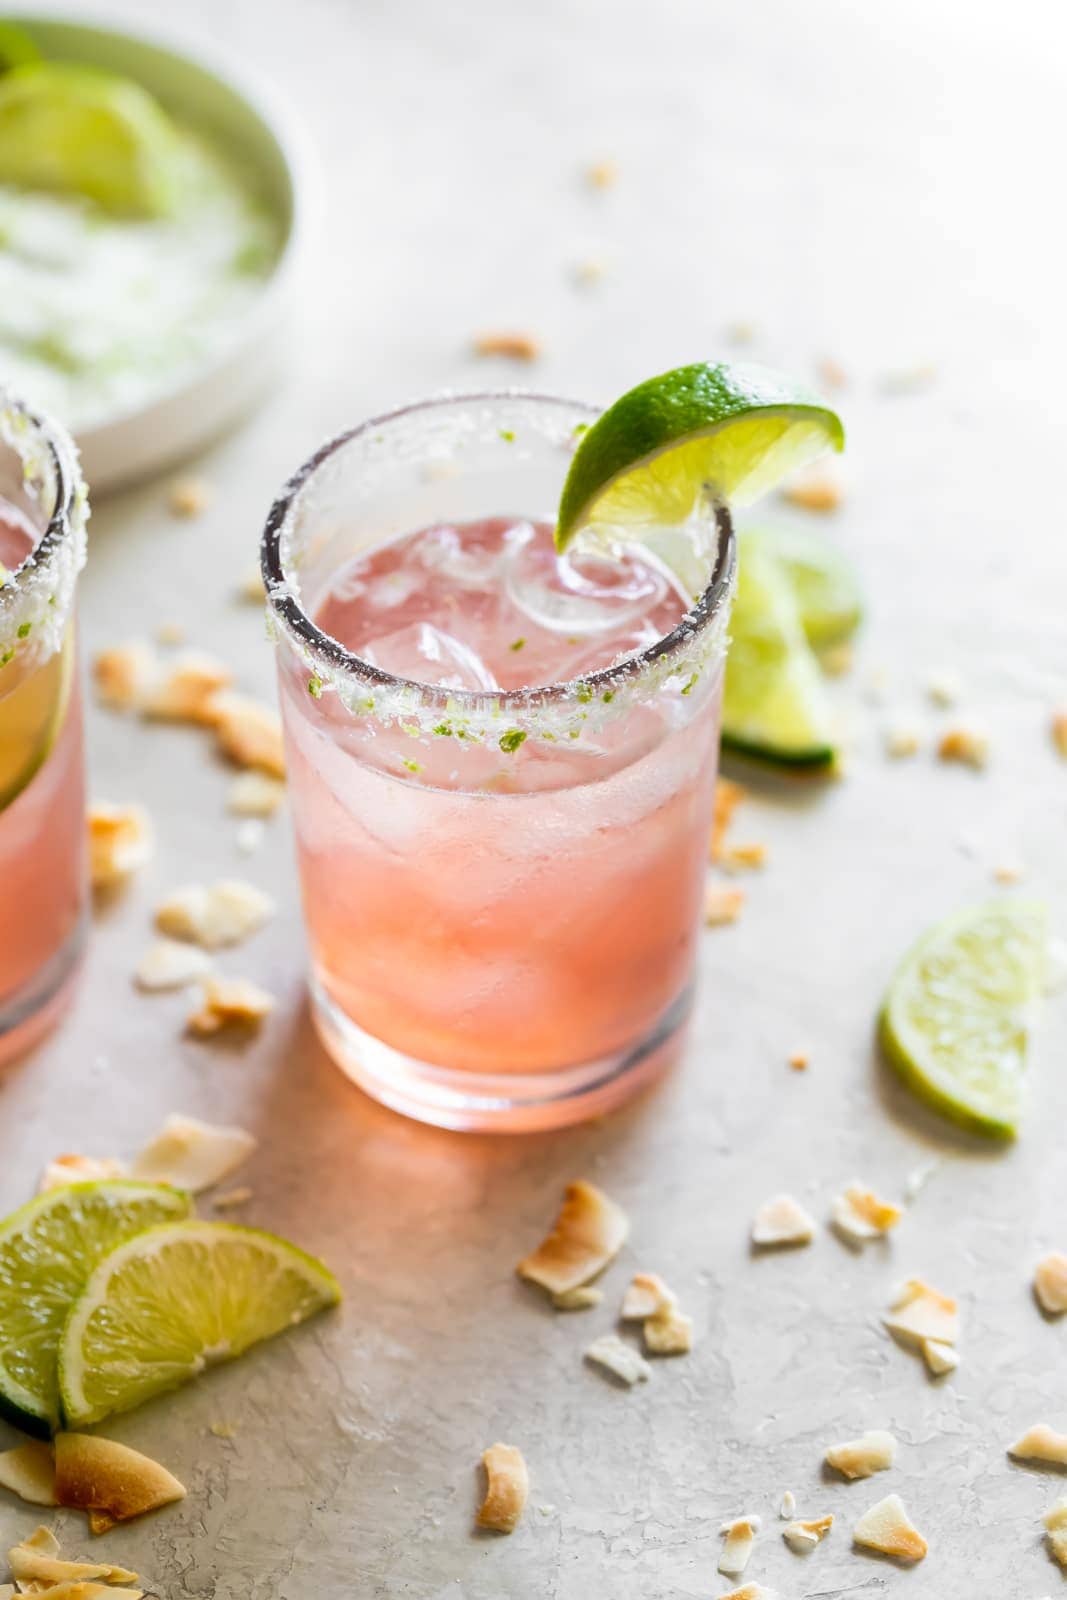 margarita made with guava nectar served over ice with a salted rim and a lime wedge